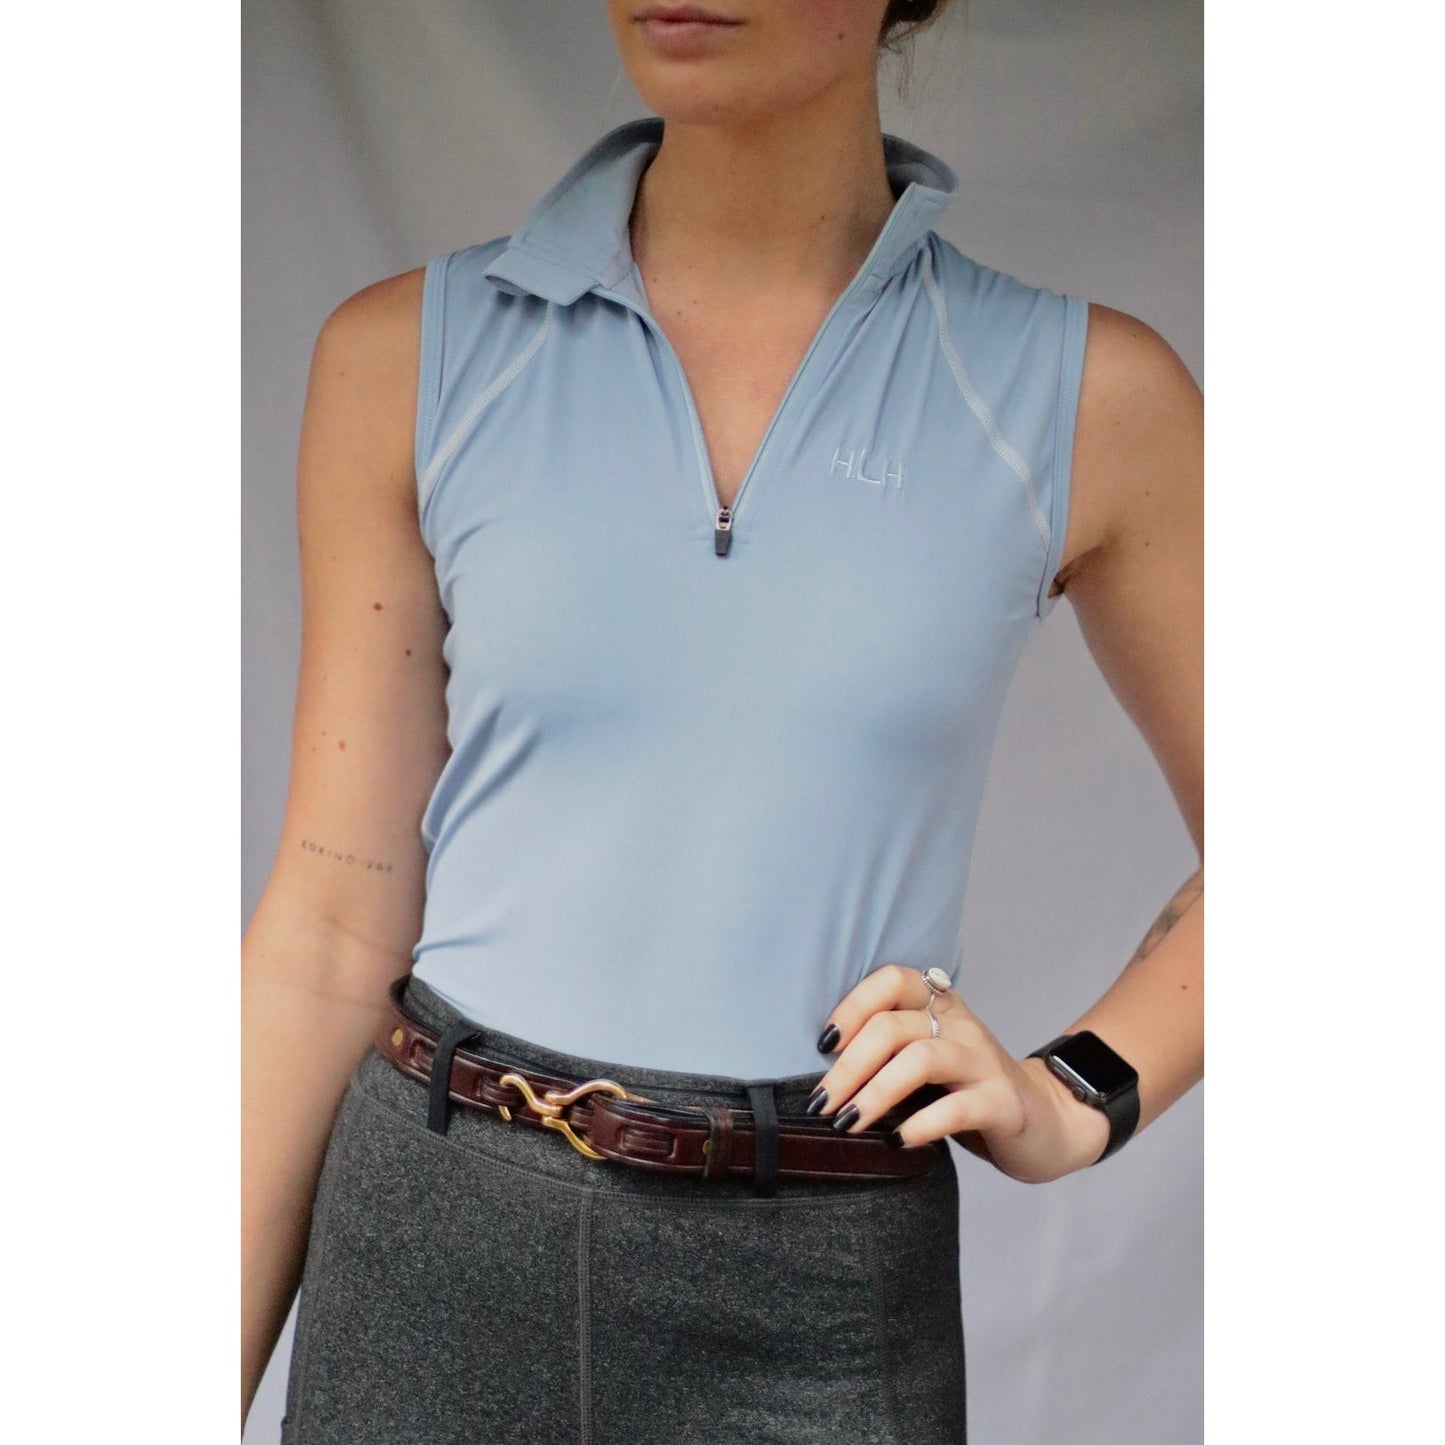 Sleeveless Base Layer by HLH Equestrian Apparel-Southern Sport Horses-The Equestrian